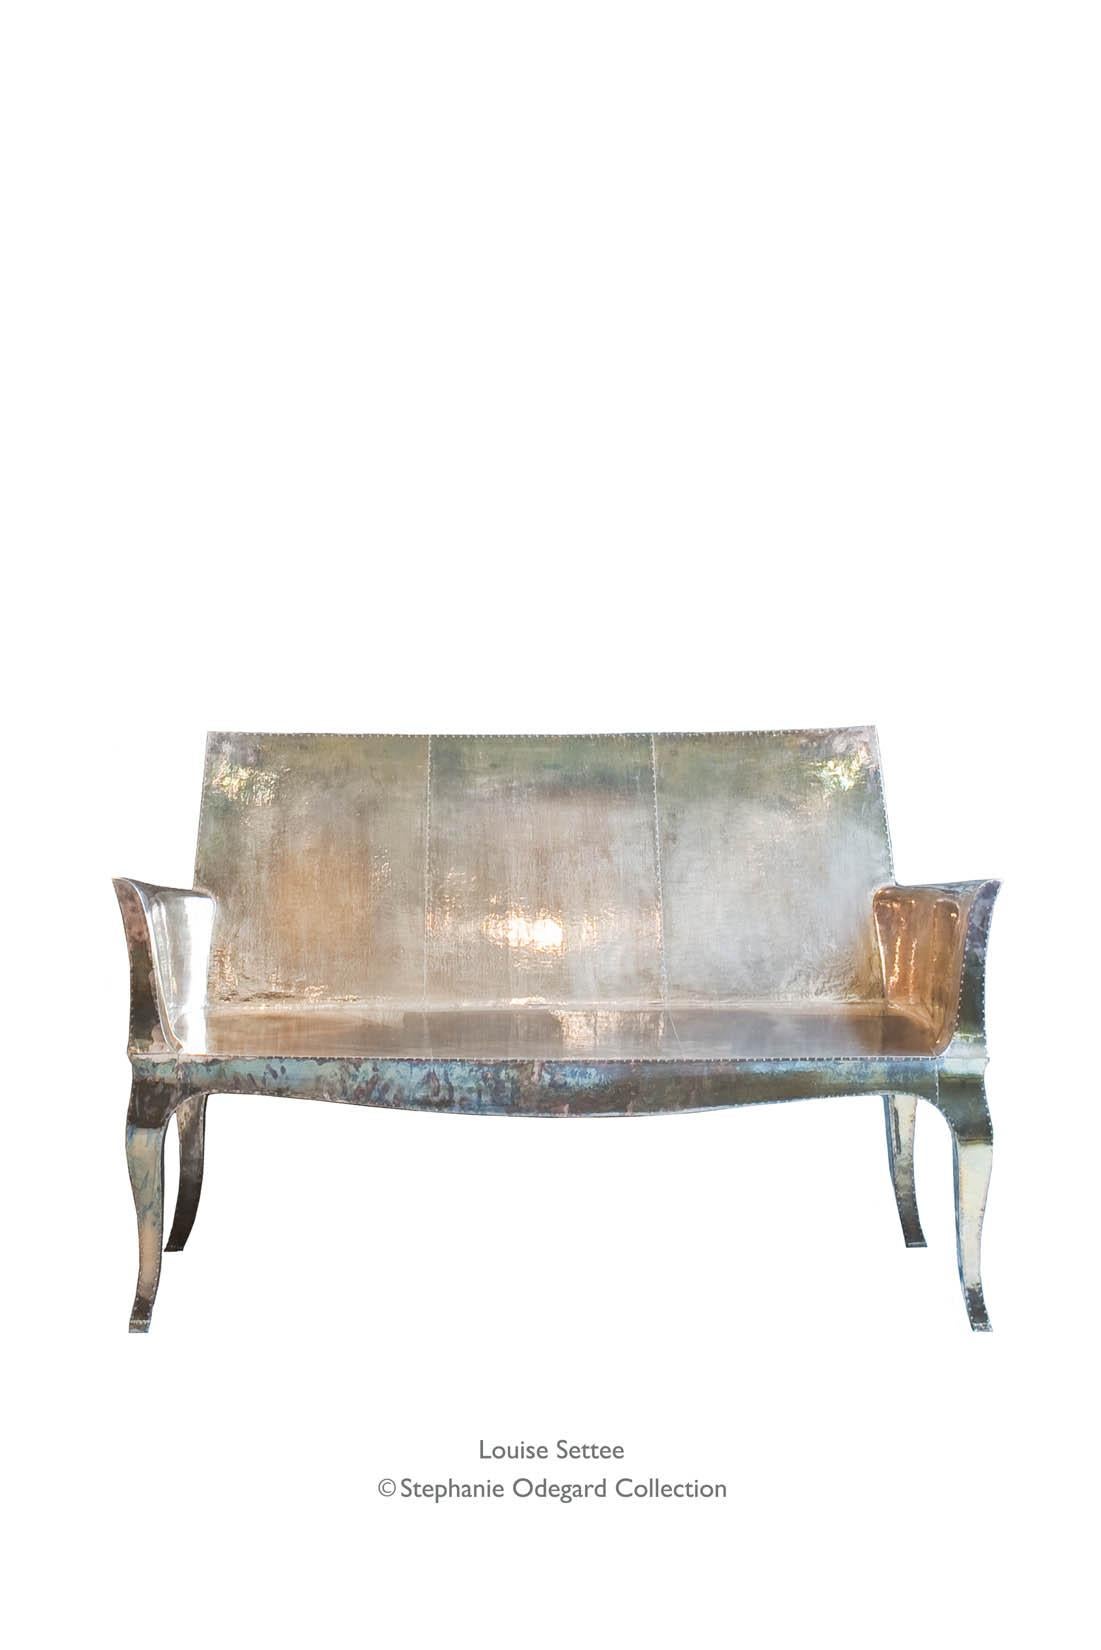 Louise Settee Art Deco Lounge Chairs in Mid. Hammered Antique Bronze   For Sale 6